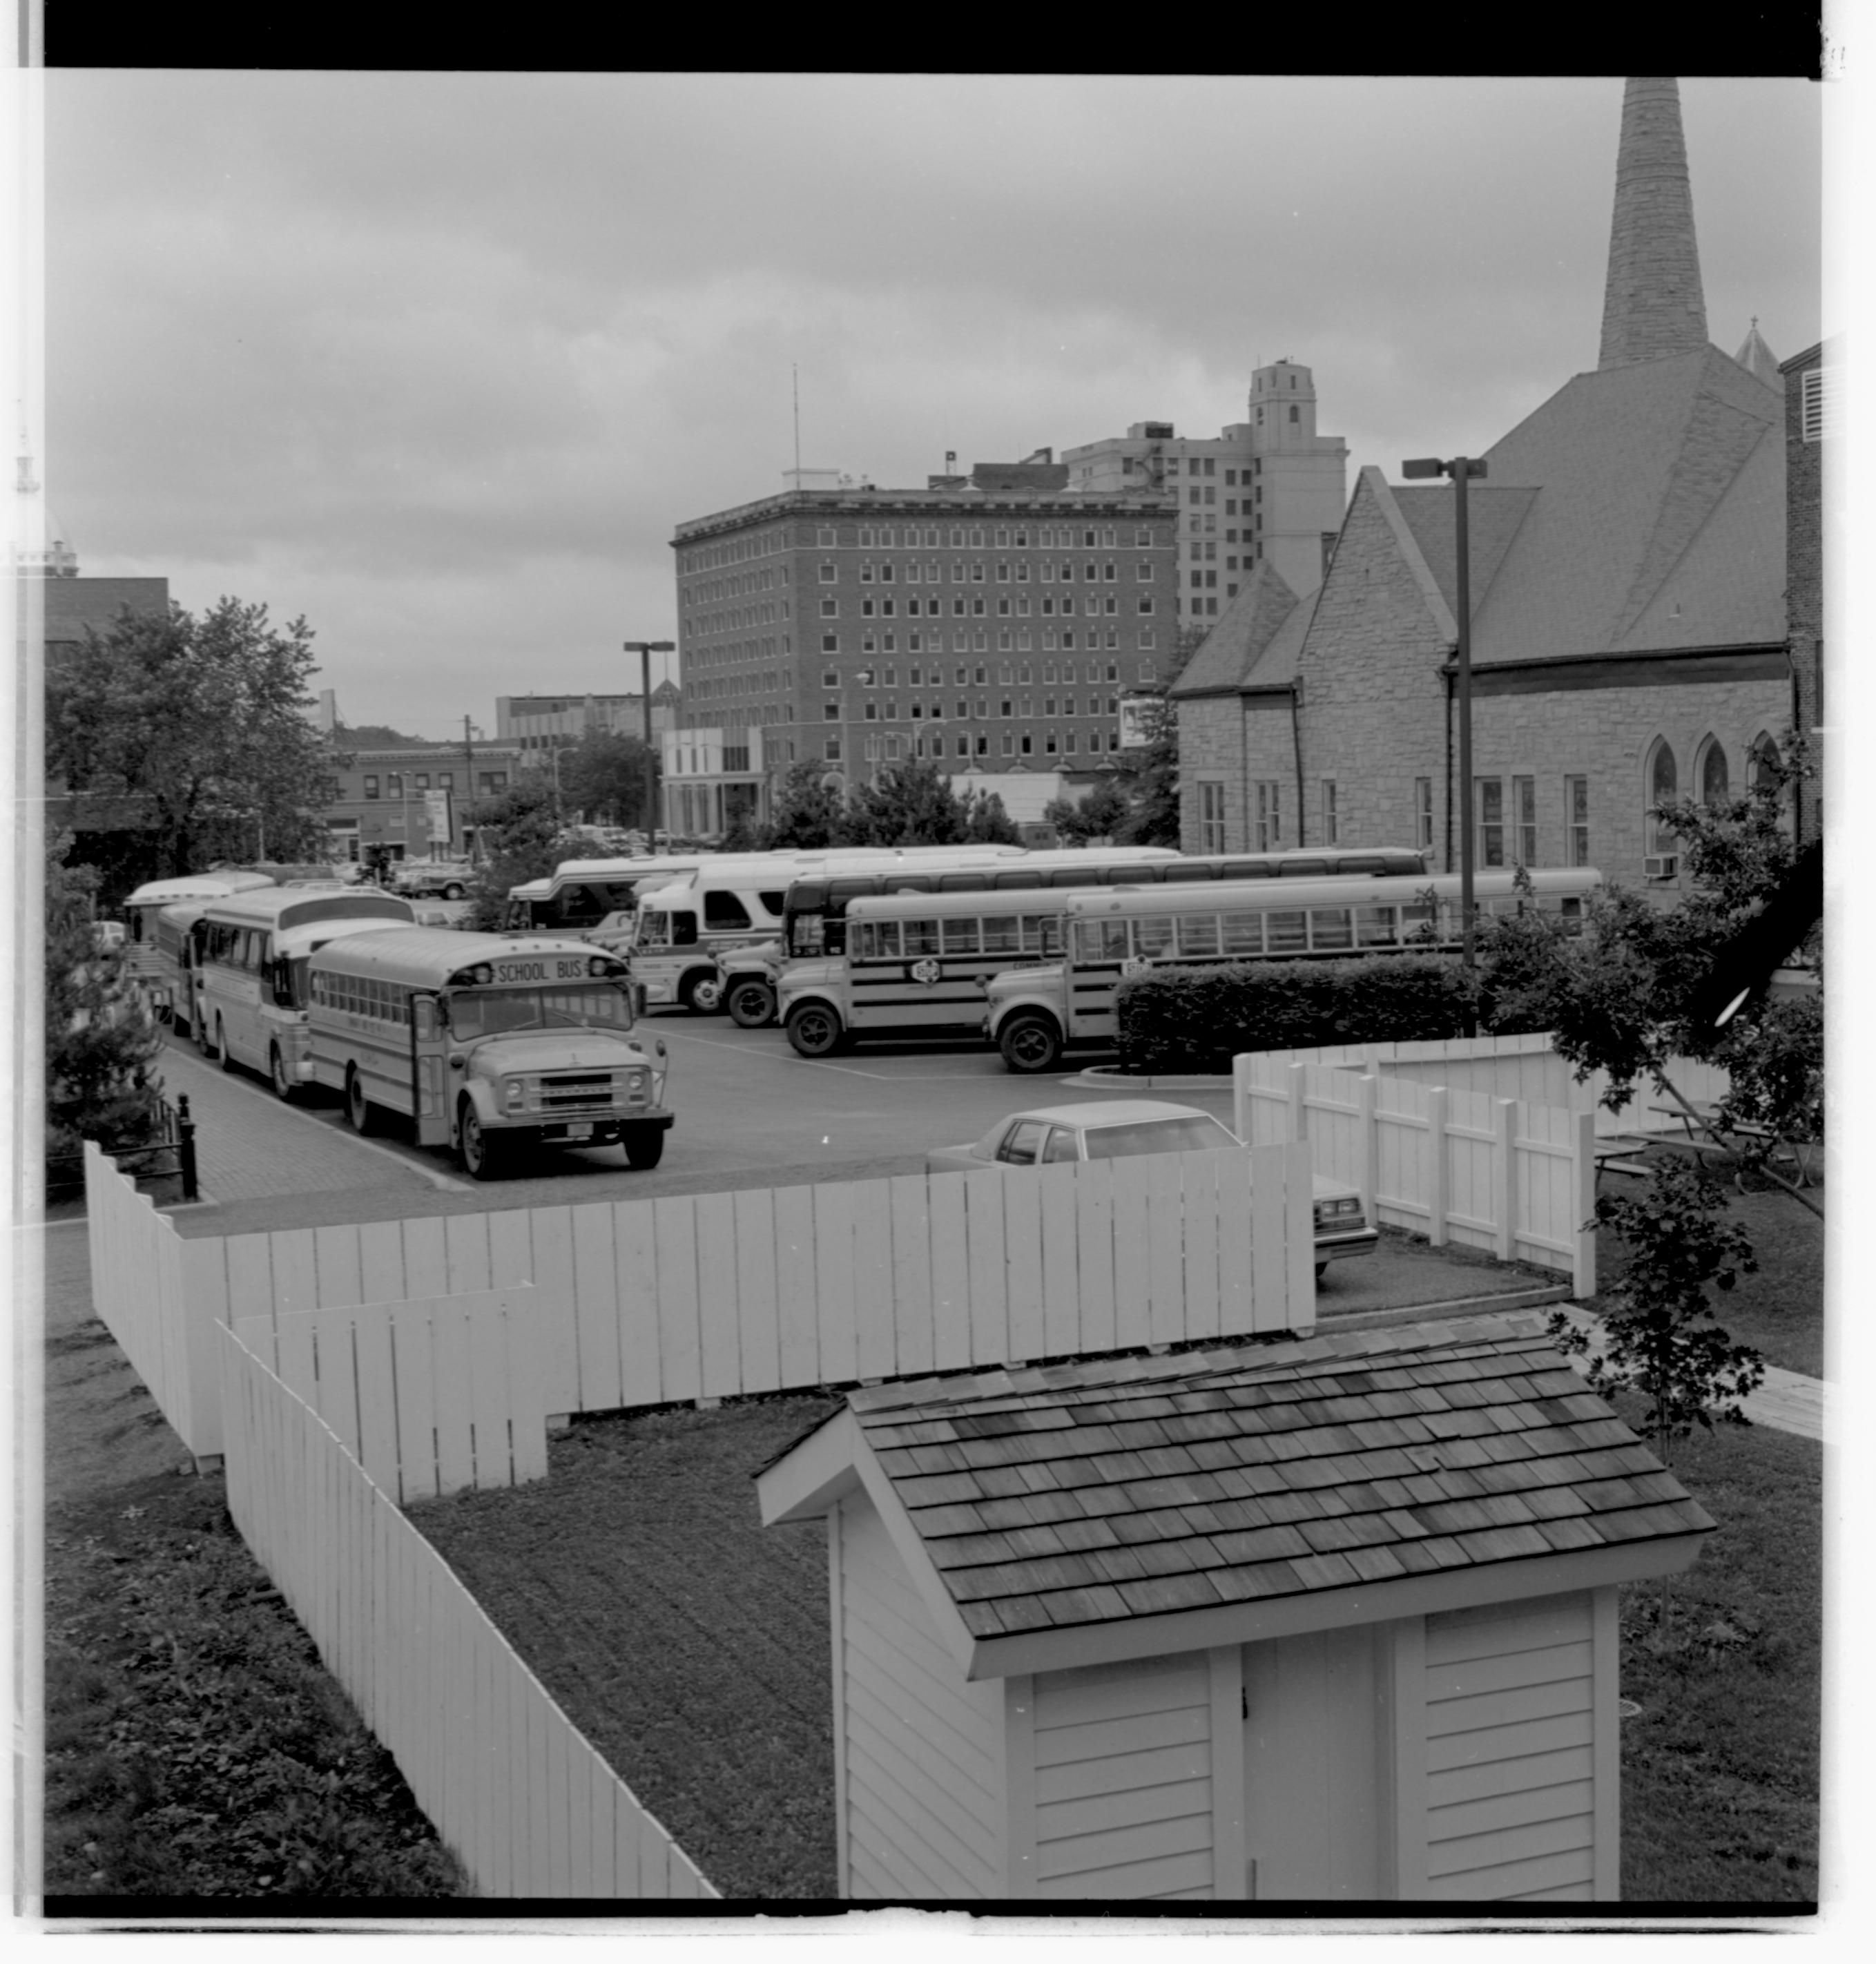 Parking lots - Bus lot, Grace Lutheran Church on right, Lyon Shed in foreground, former Leland Hotel in background looking Northwest buses, parking lot, Grace Lutheran Church